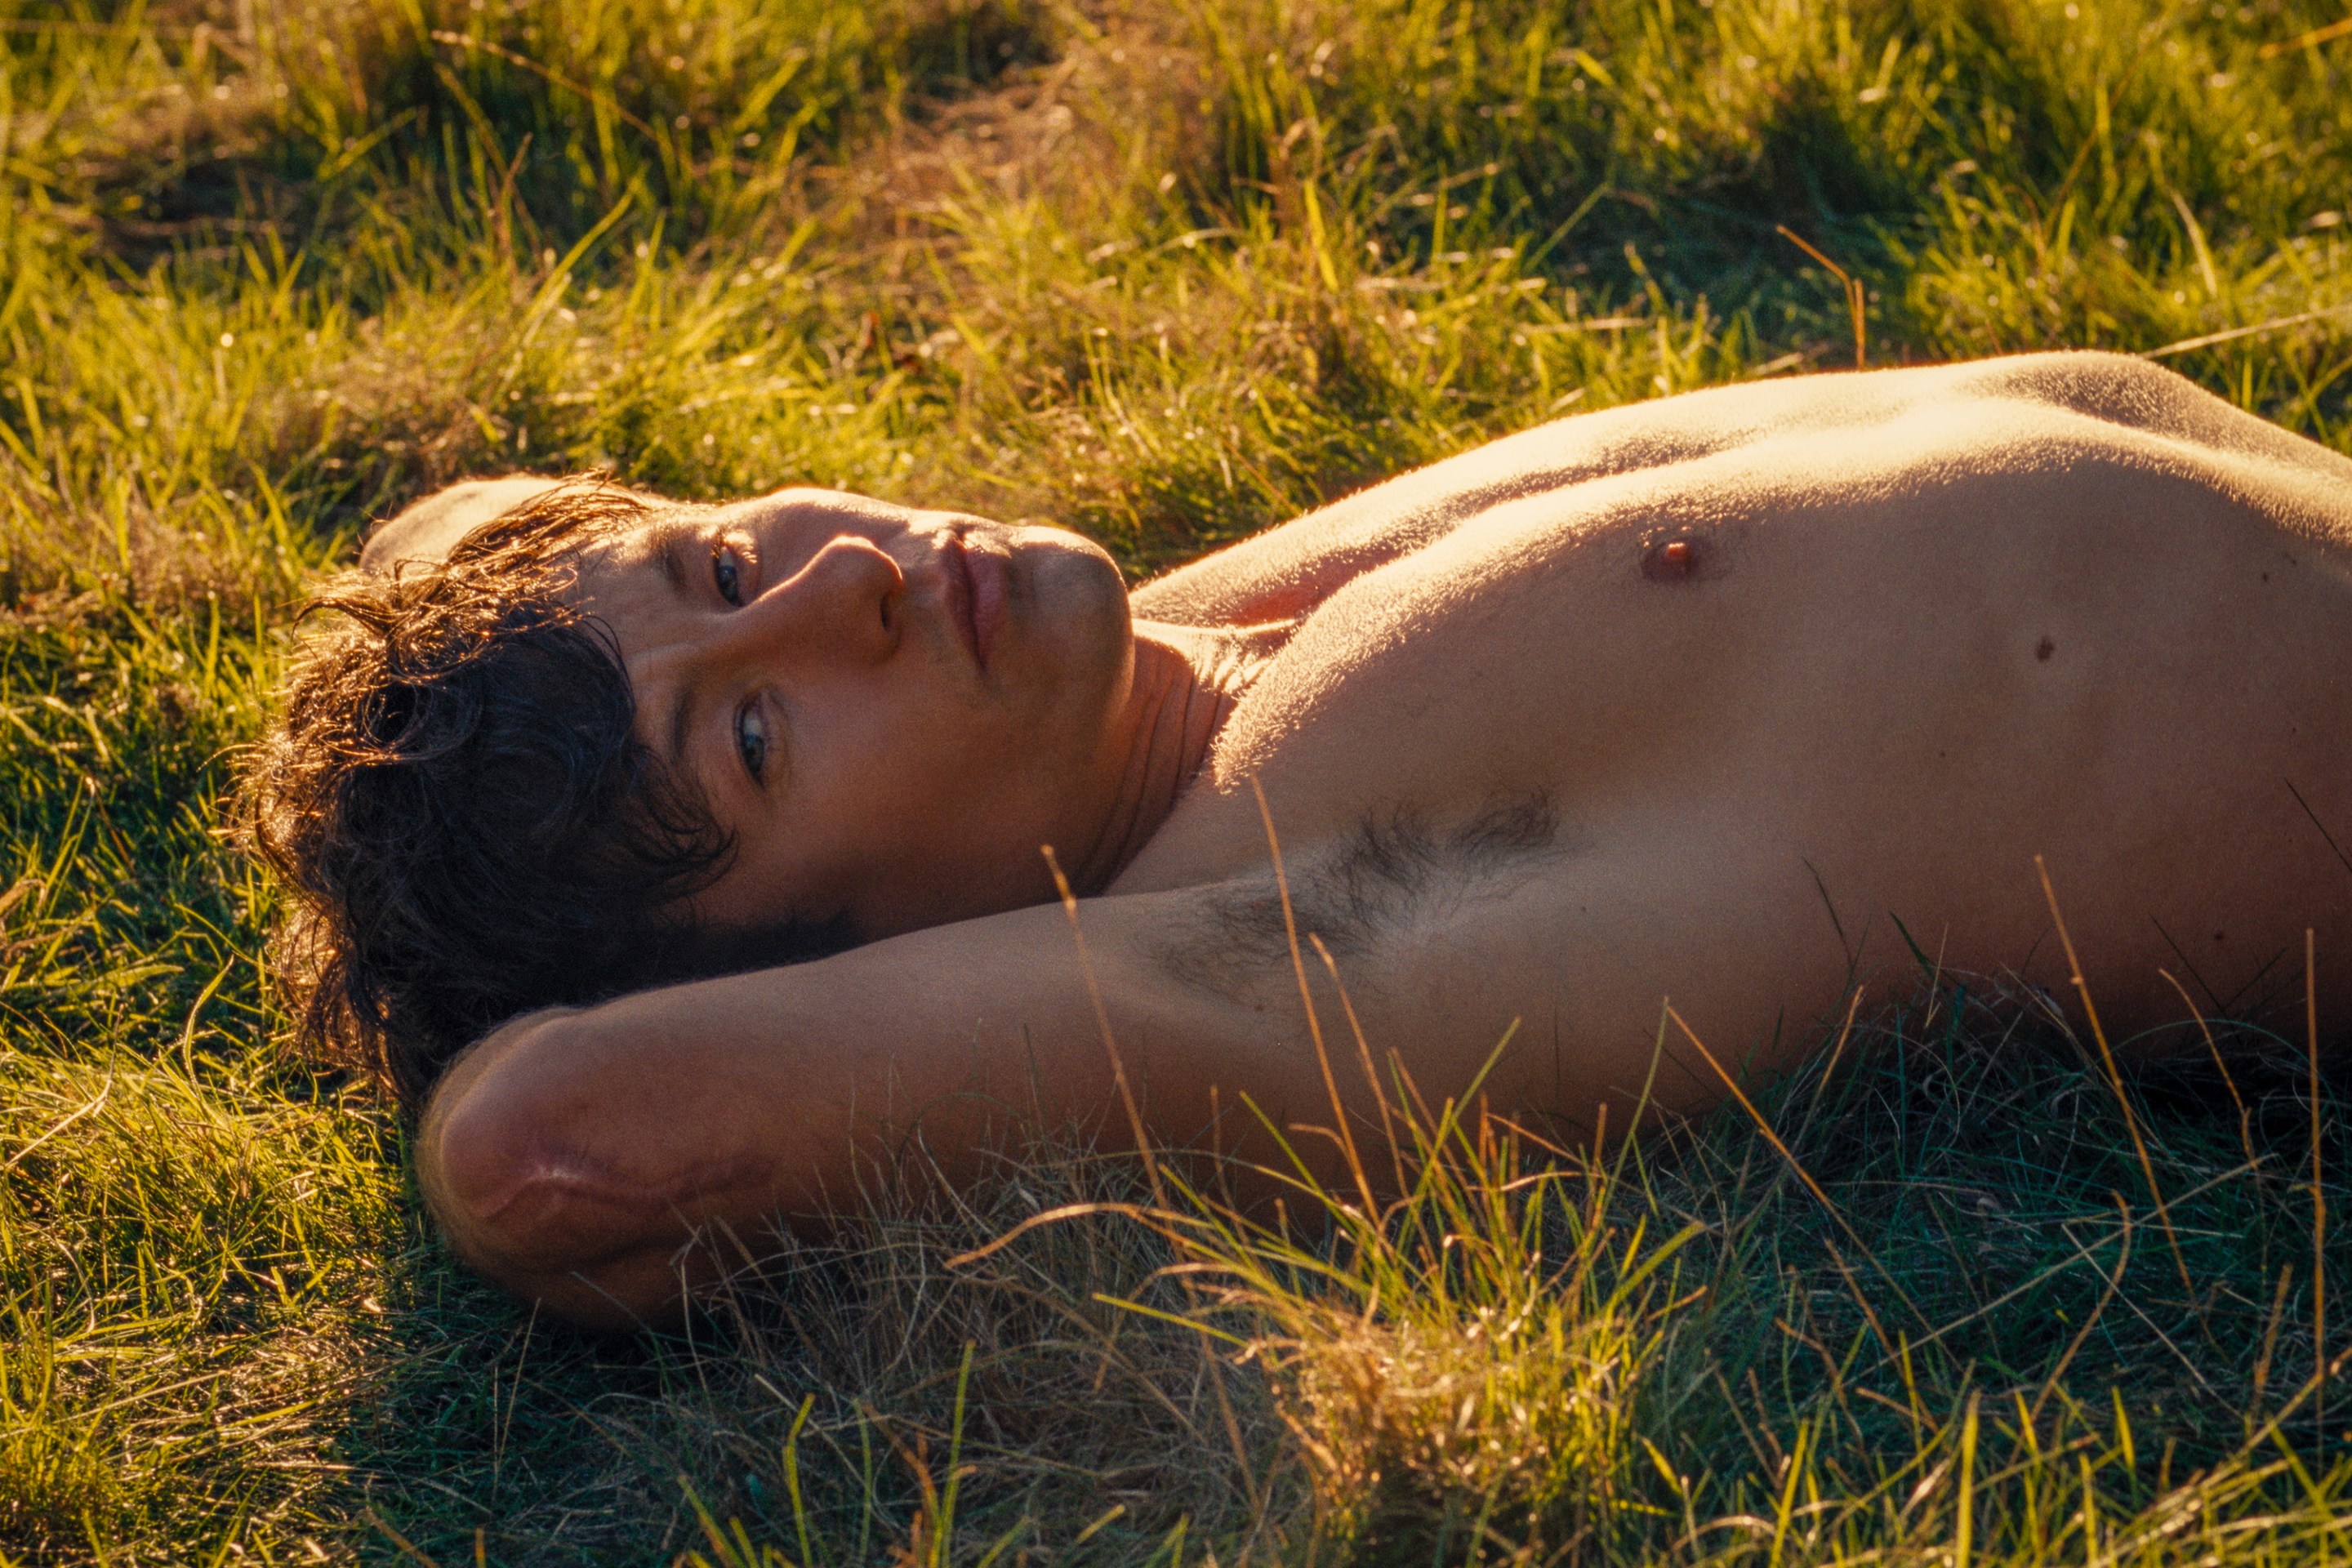 A screenshot from Saltburn, showing Barry Keoghan as Oliver Quick laying down in the grass, shirtless in the goilden afternoon light.